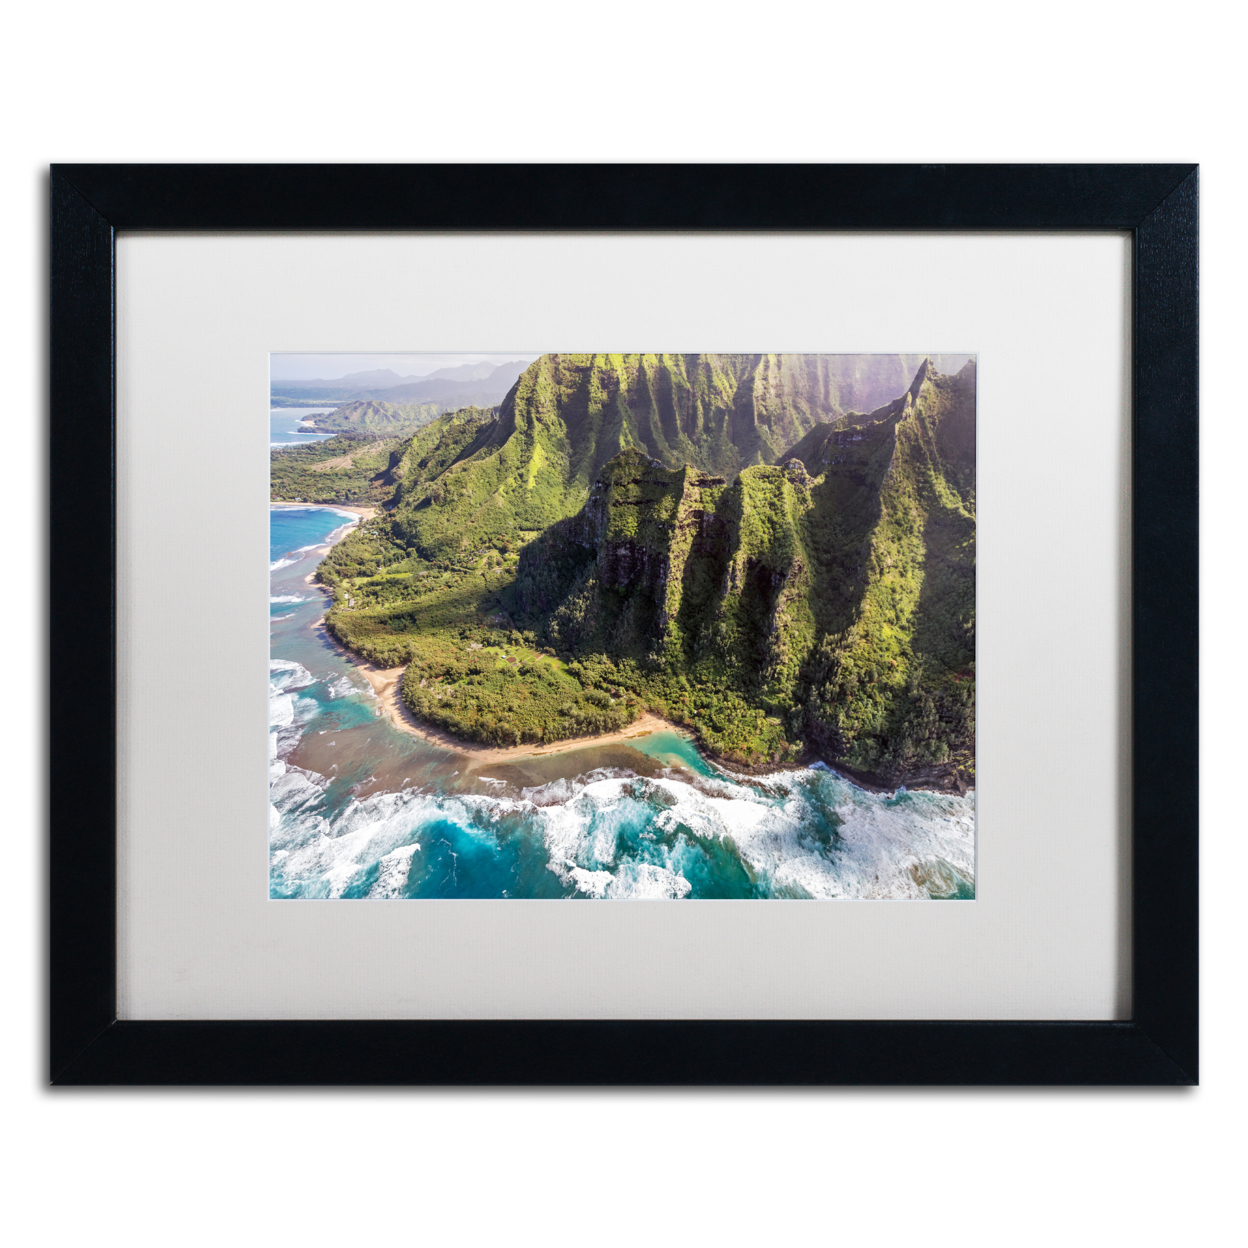 Pierre Leclerc 'Kee Beach Aerial View' Black Wooden Framed Art 18 X 22 Inches